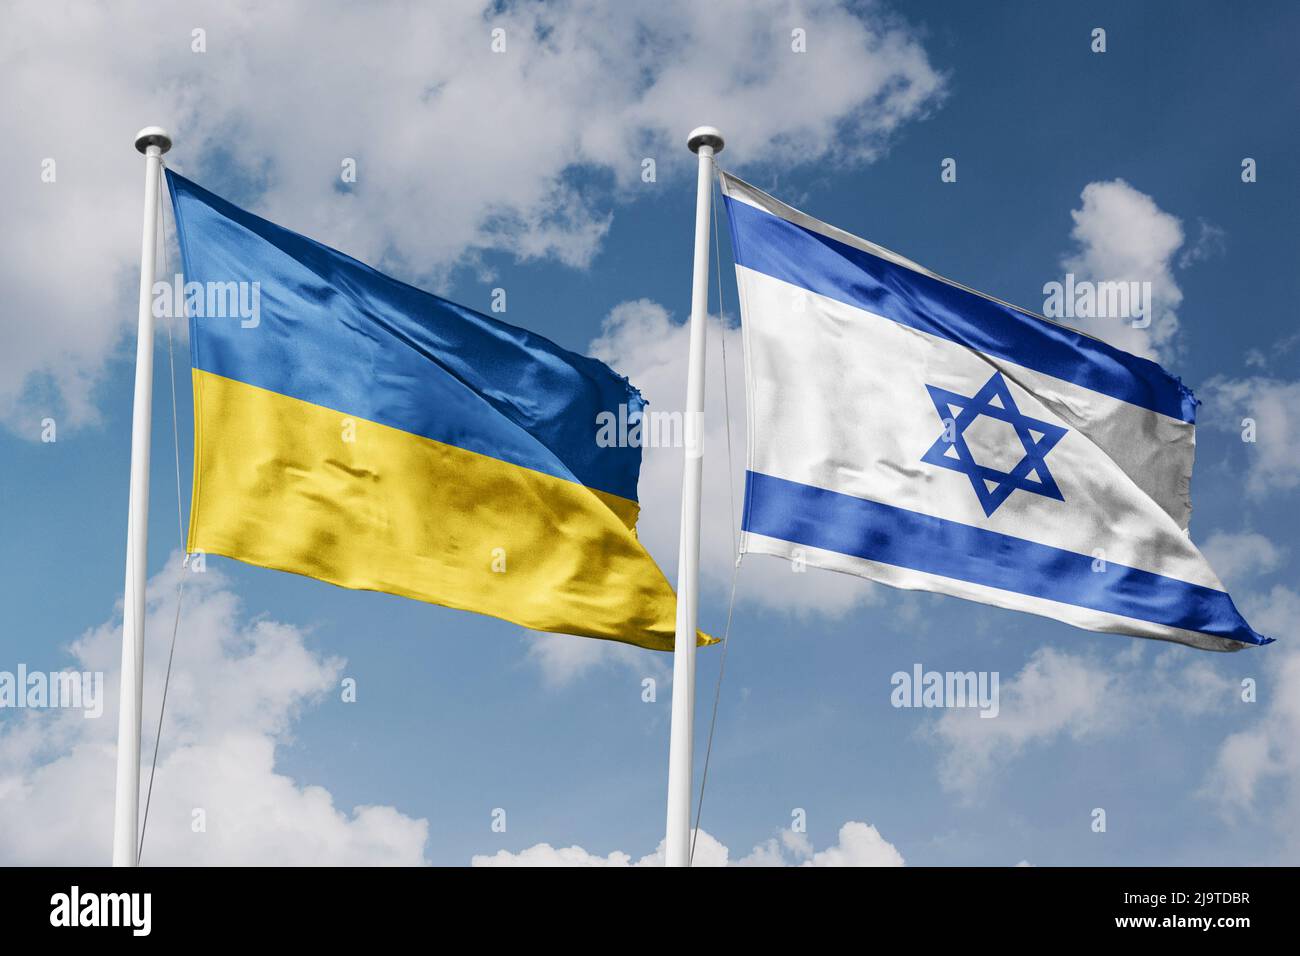 Ukraine and Israel two flags on flagpoles and blue cloudy sky background Stock Photo